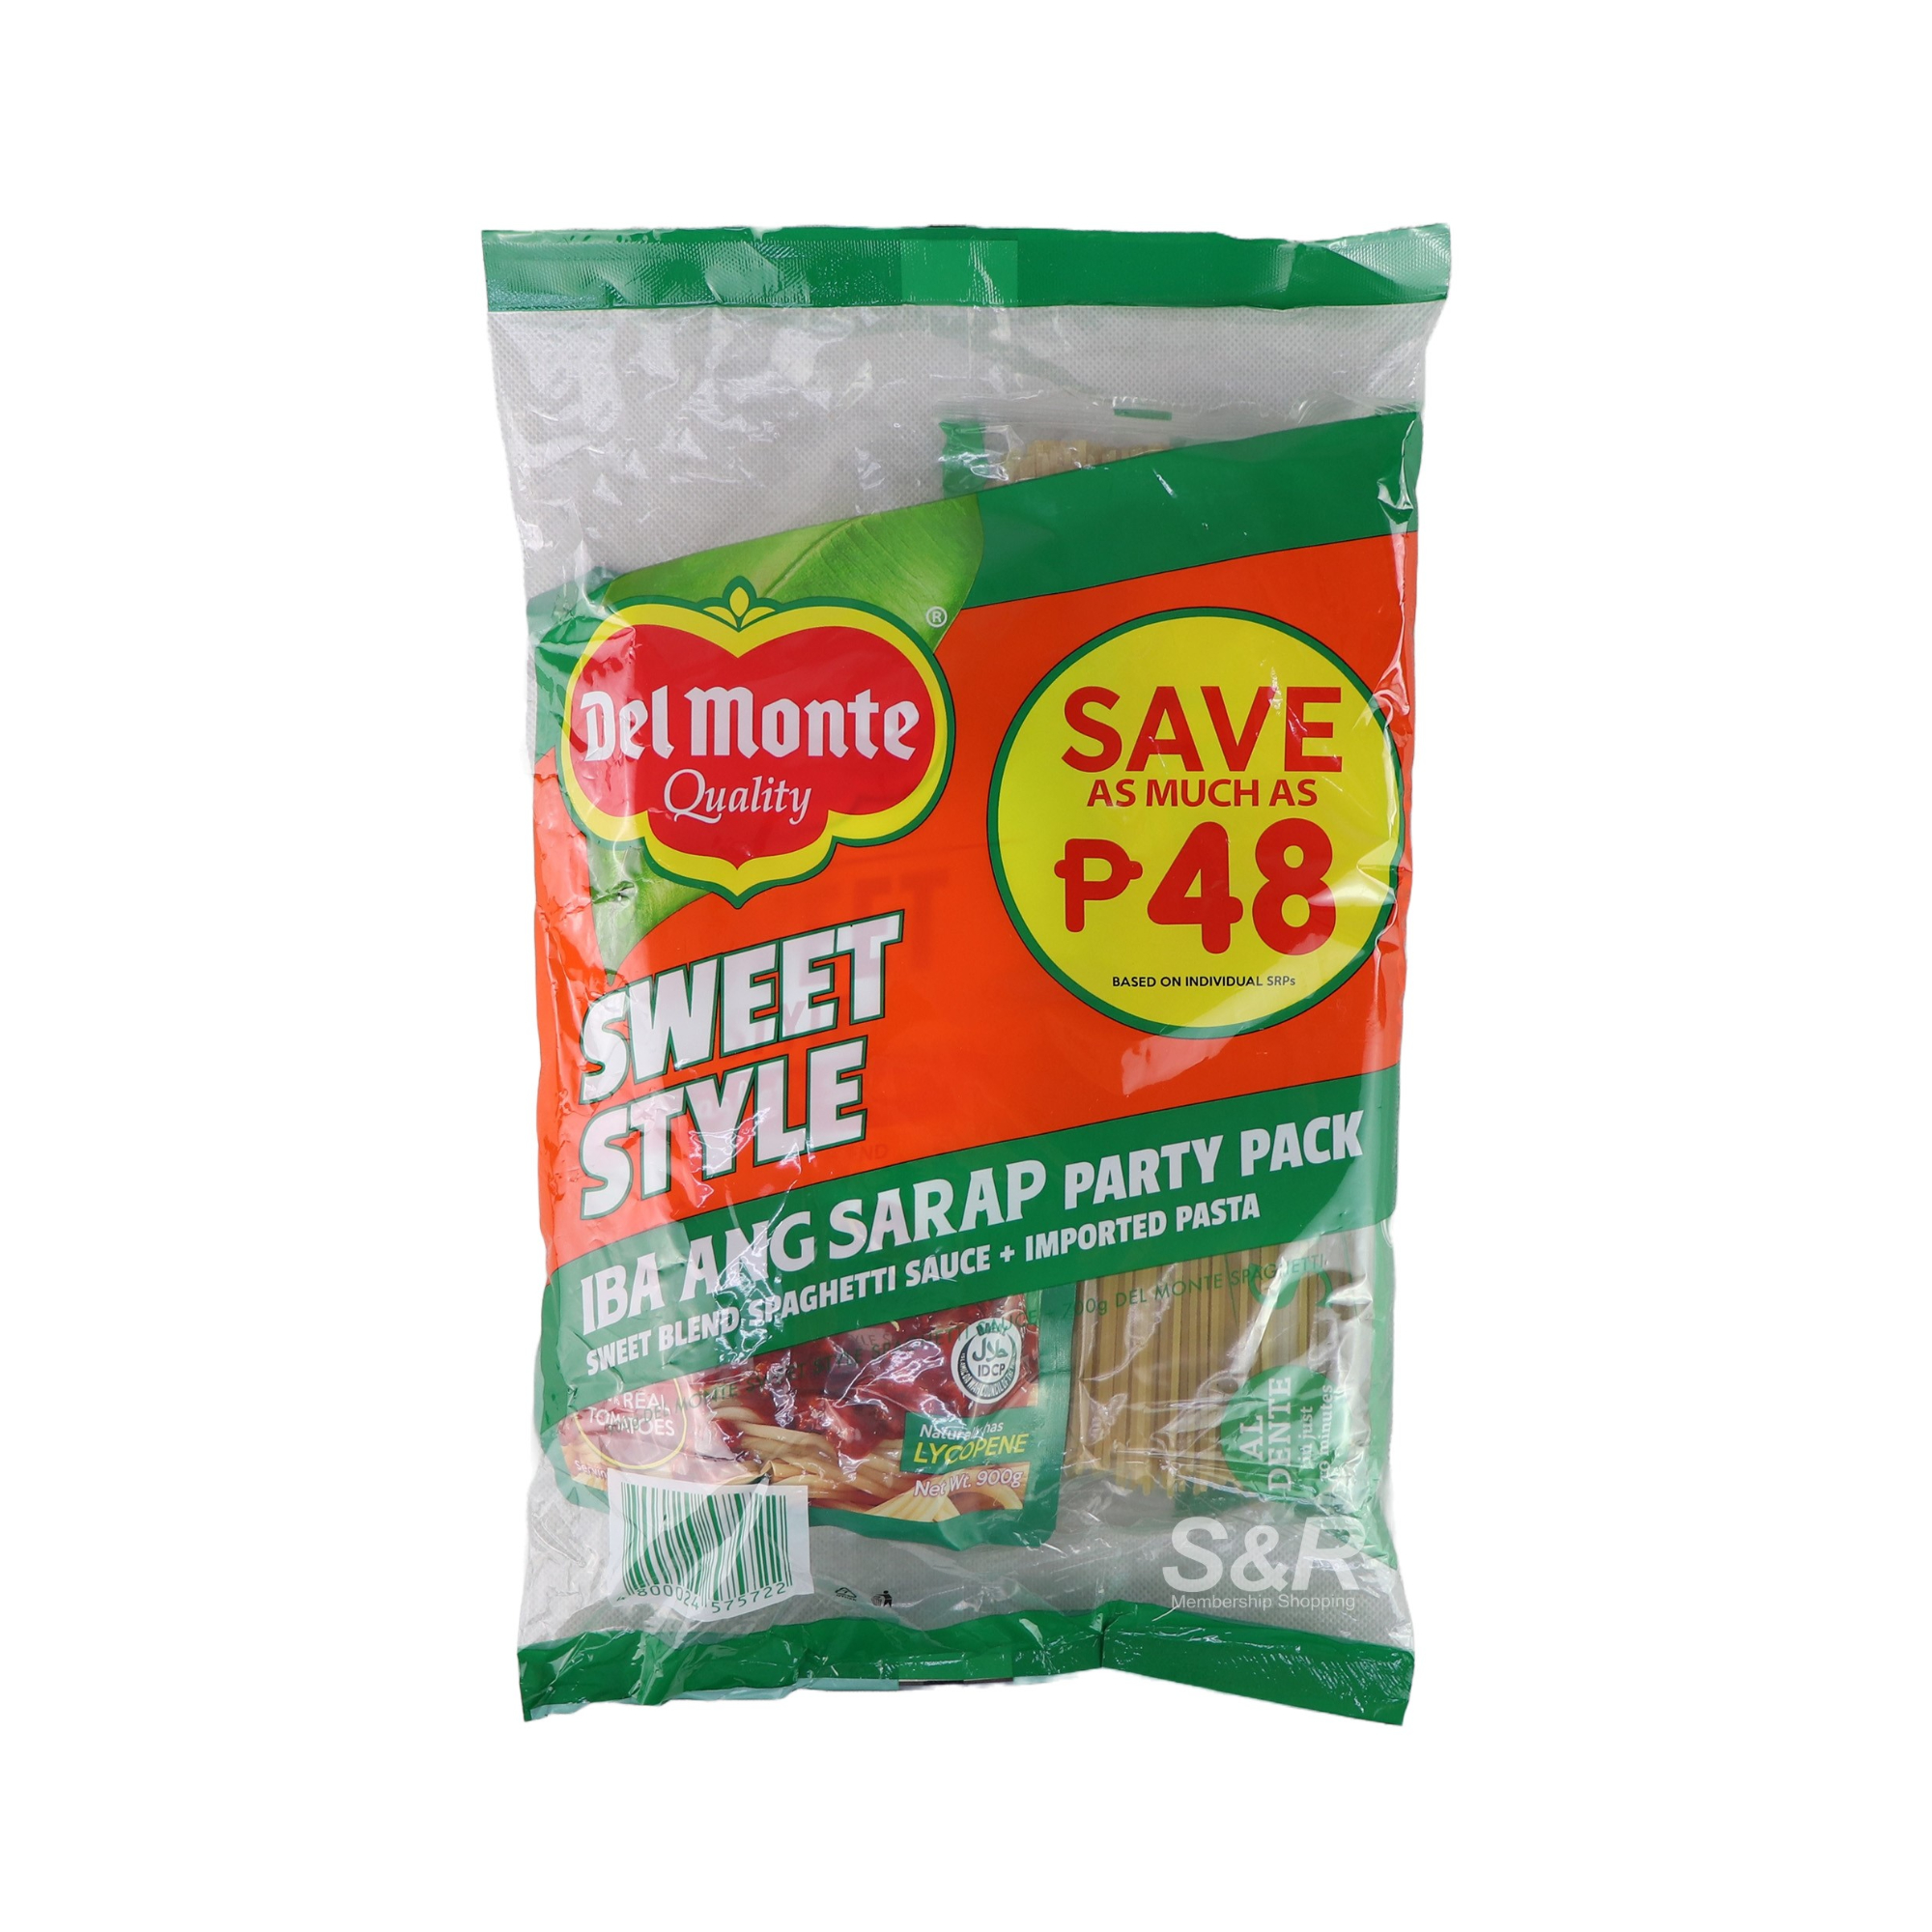 Del Monte Sweet Style Spaghetti Party Pack 1 set